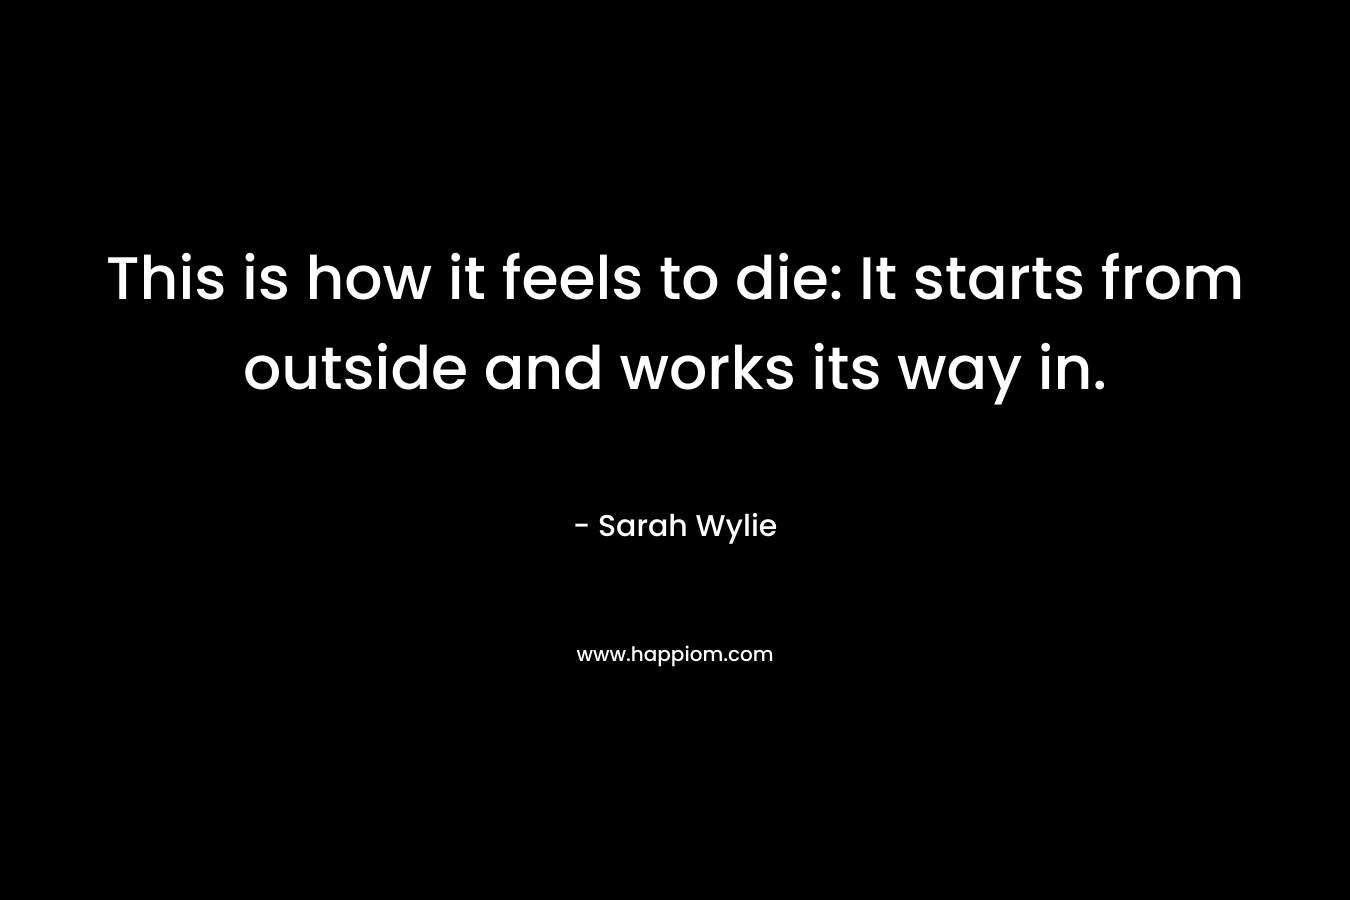 This is how it feels to die: It starts from outside and works its way in. – Sarah Wylie